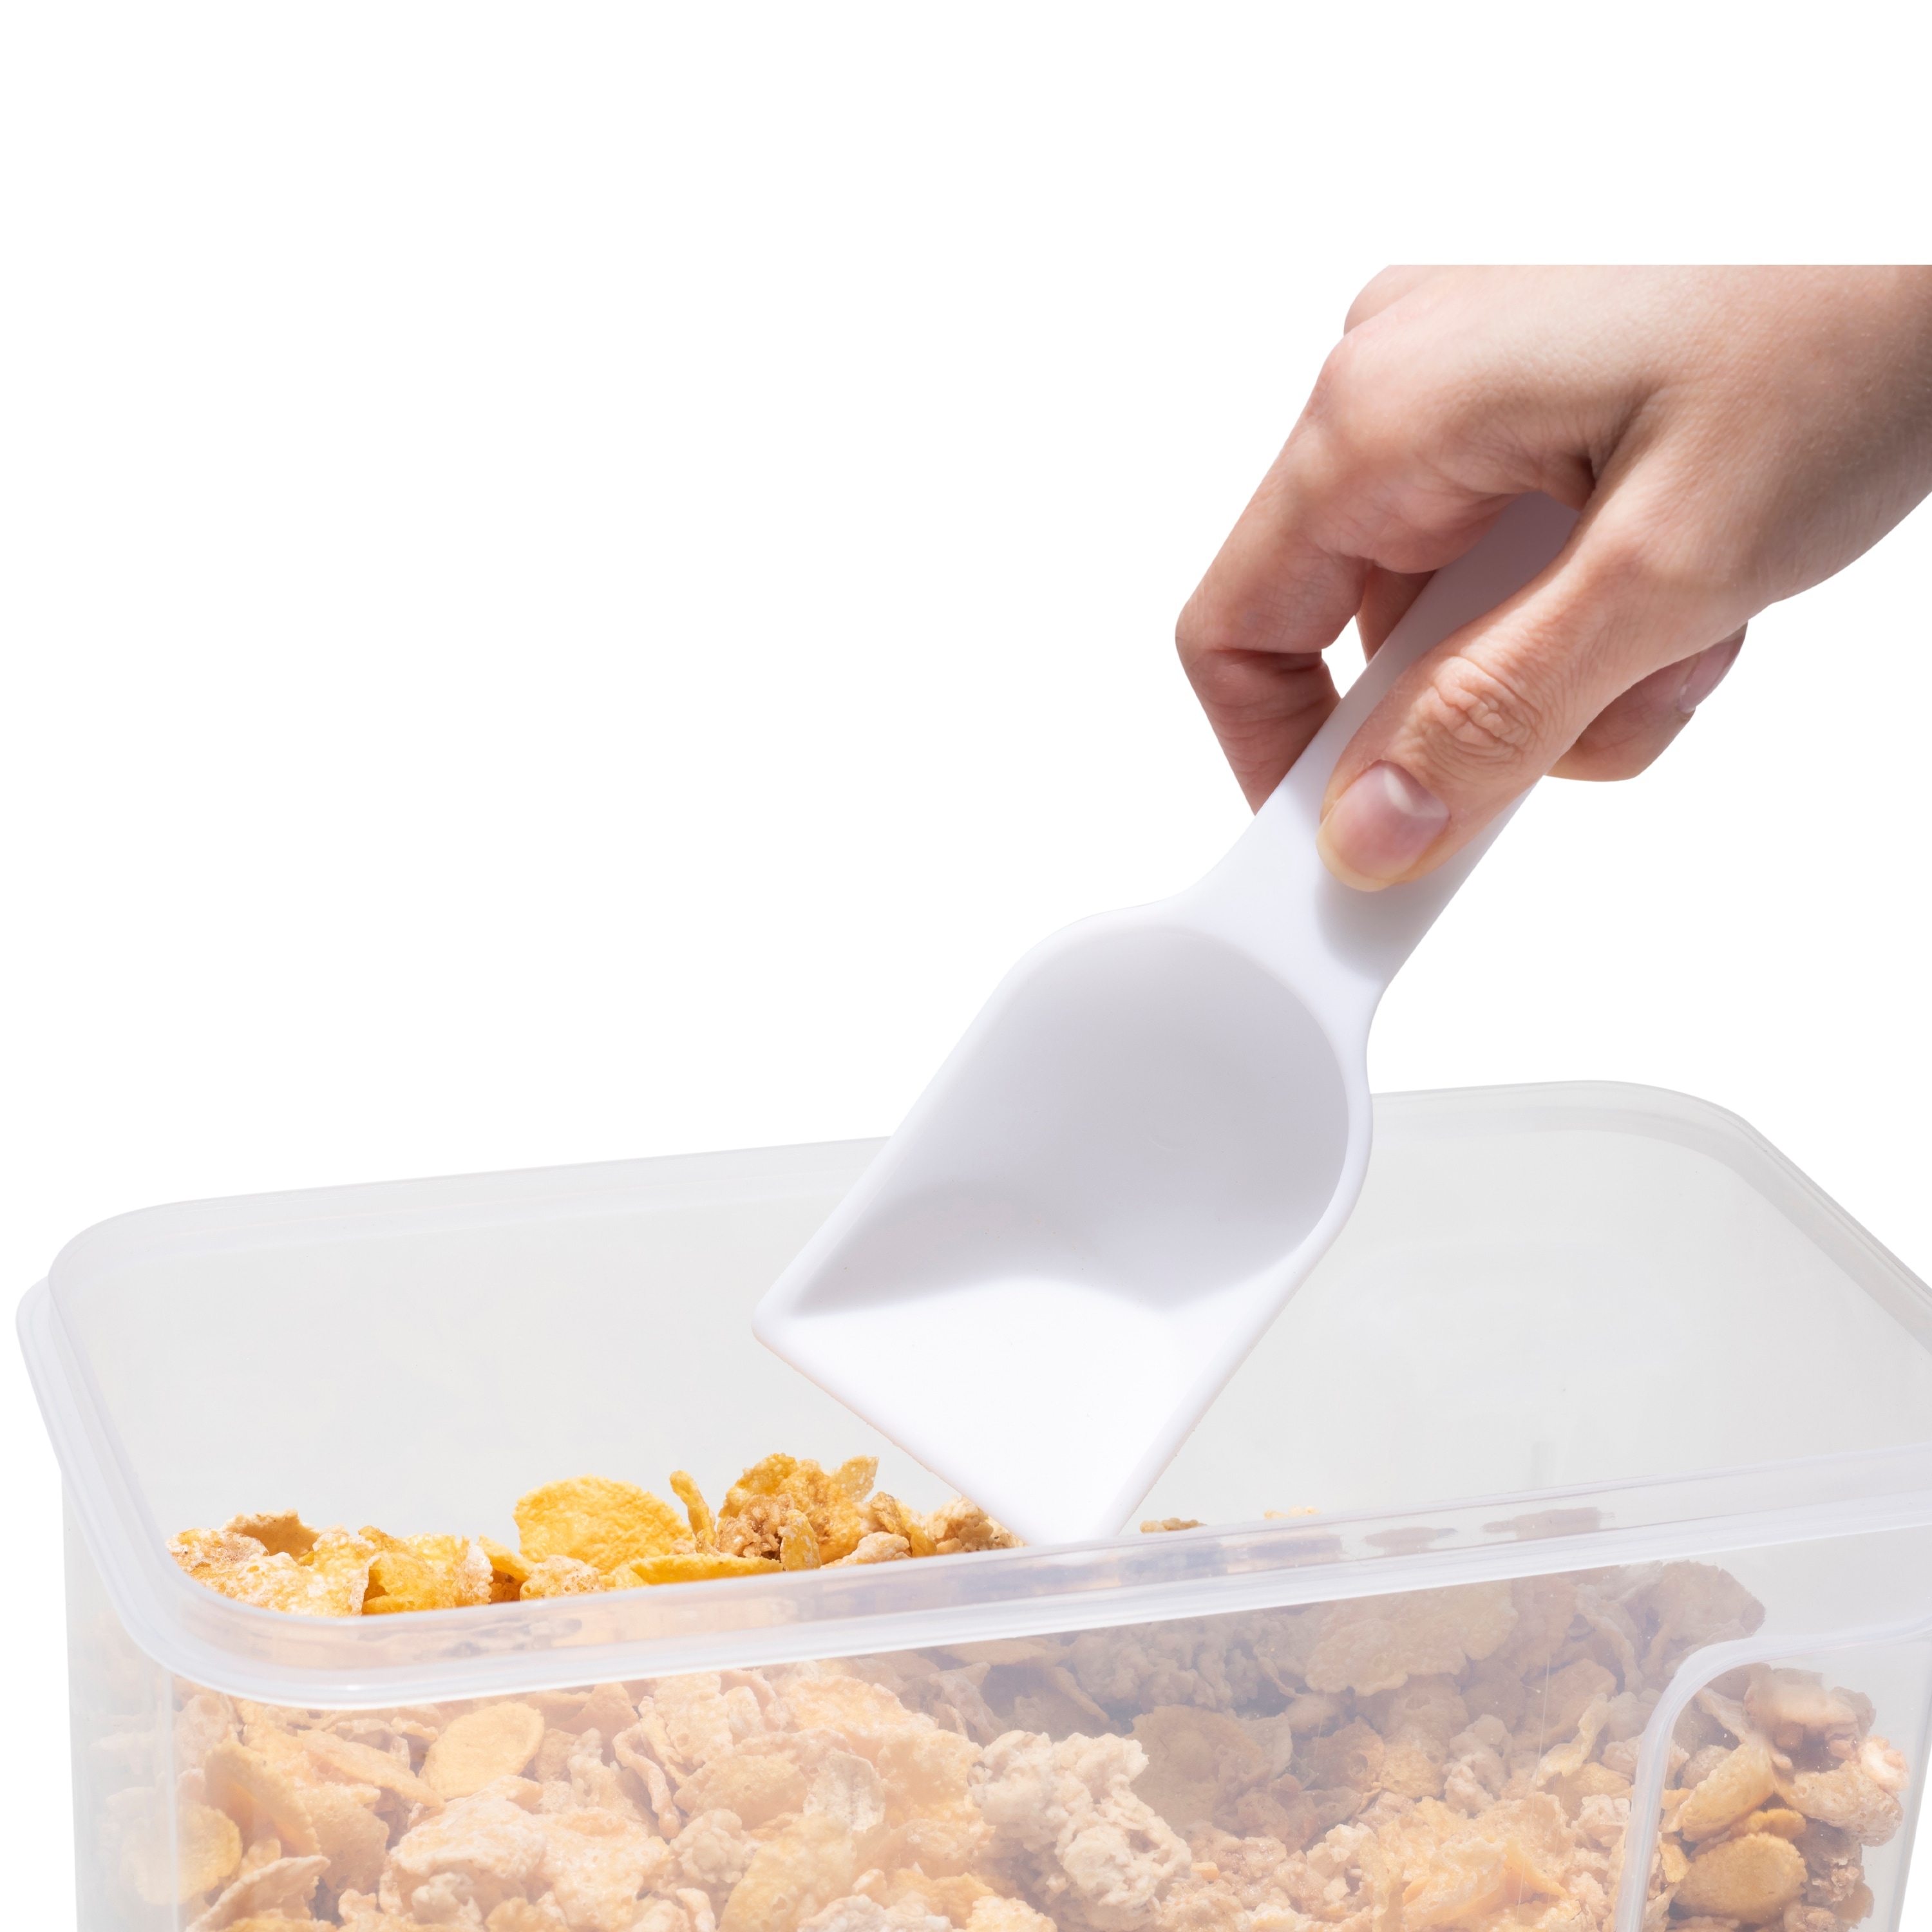 https://ak1.ostkcdn.com/images/products/is/images/direct/0f85a85bad8461c05498c190a854d8ebd6b0f227/Kitchen-Details-Large-Size-Airtight-Cereal-Container-with-Scooper.jpg